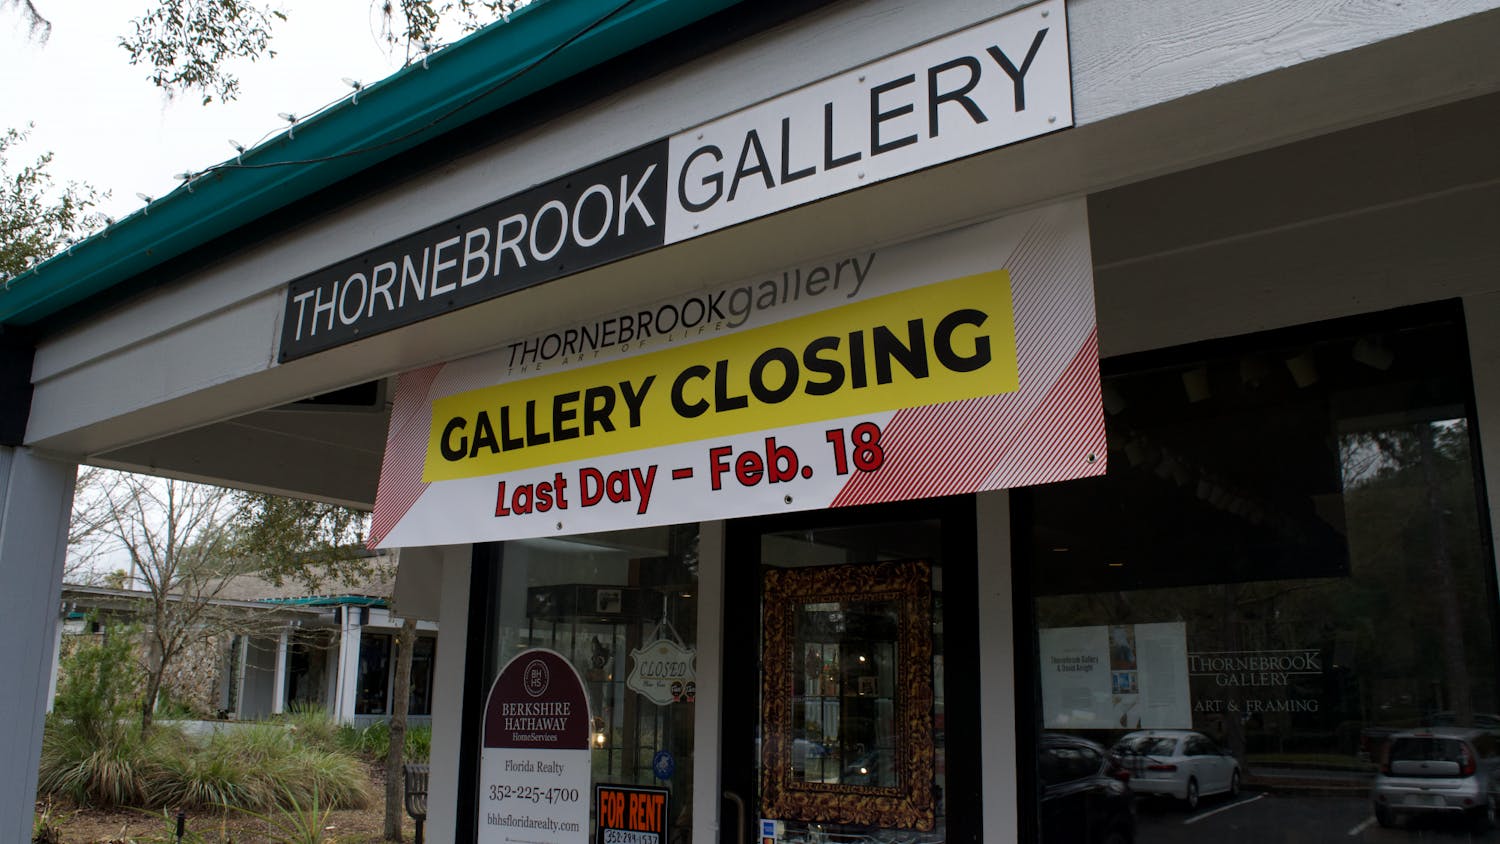 Local business owner David Arrighi is closing Thornebrook Gallery after 40 years of business. Arrighi opened Thornebrook Gallery in 1991, three weeks after he graduated from UF with a degree in printmaking.